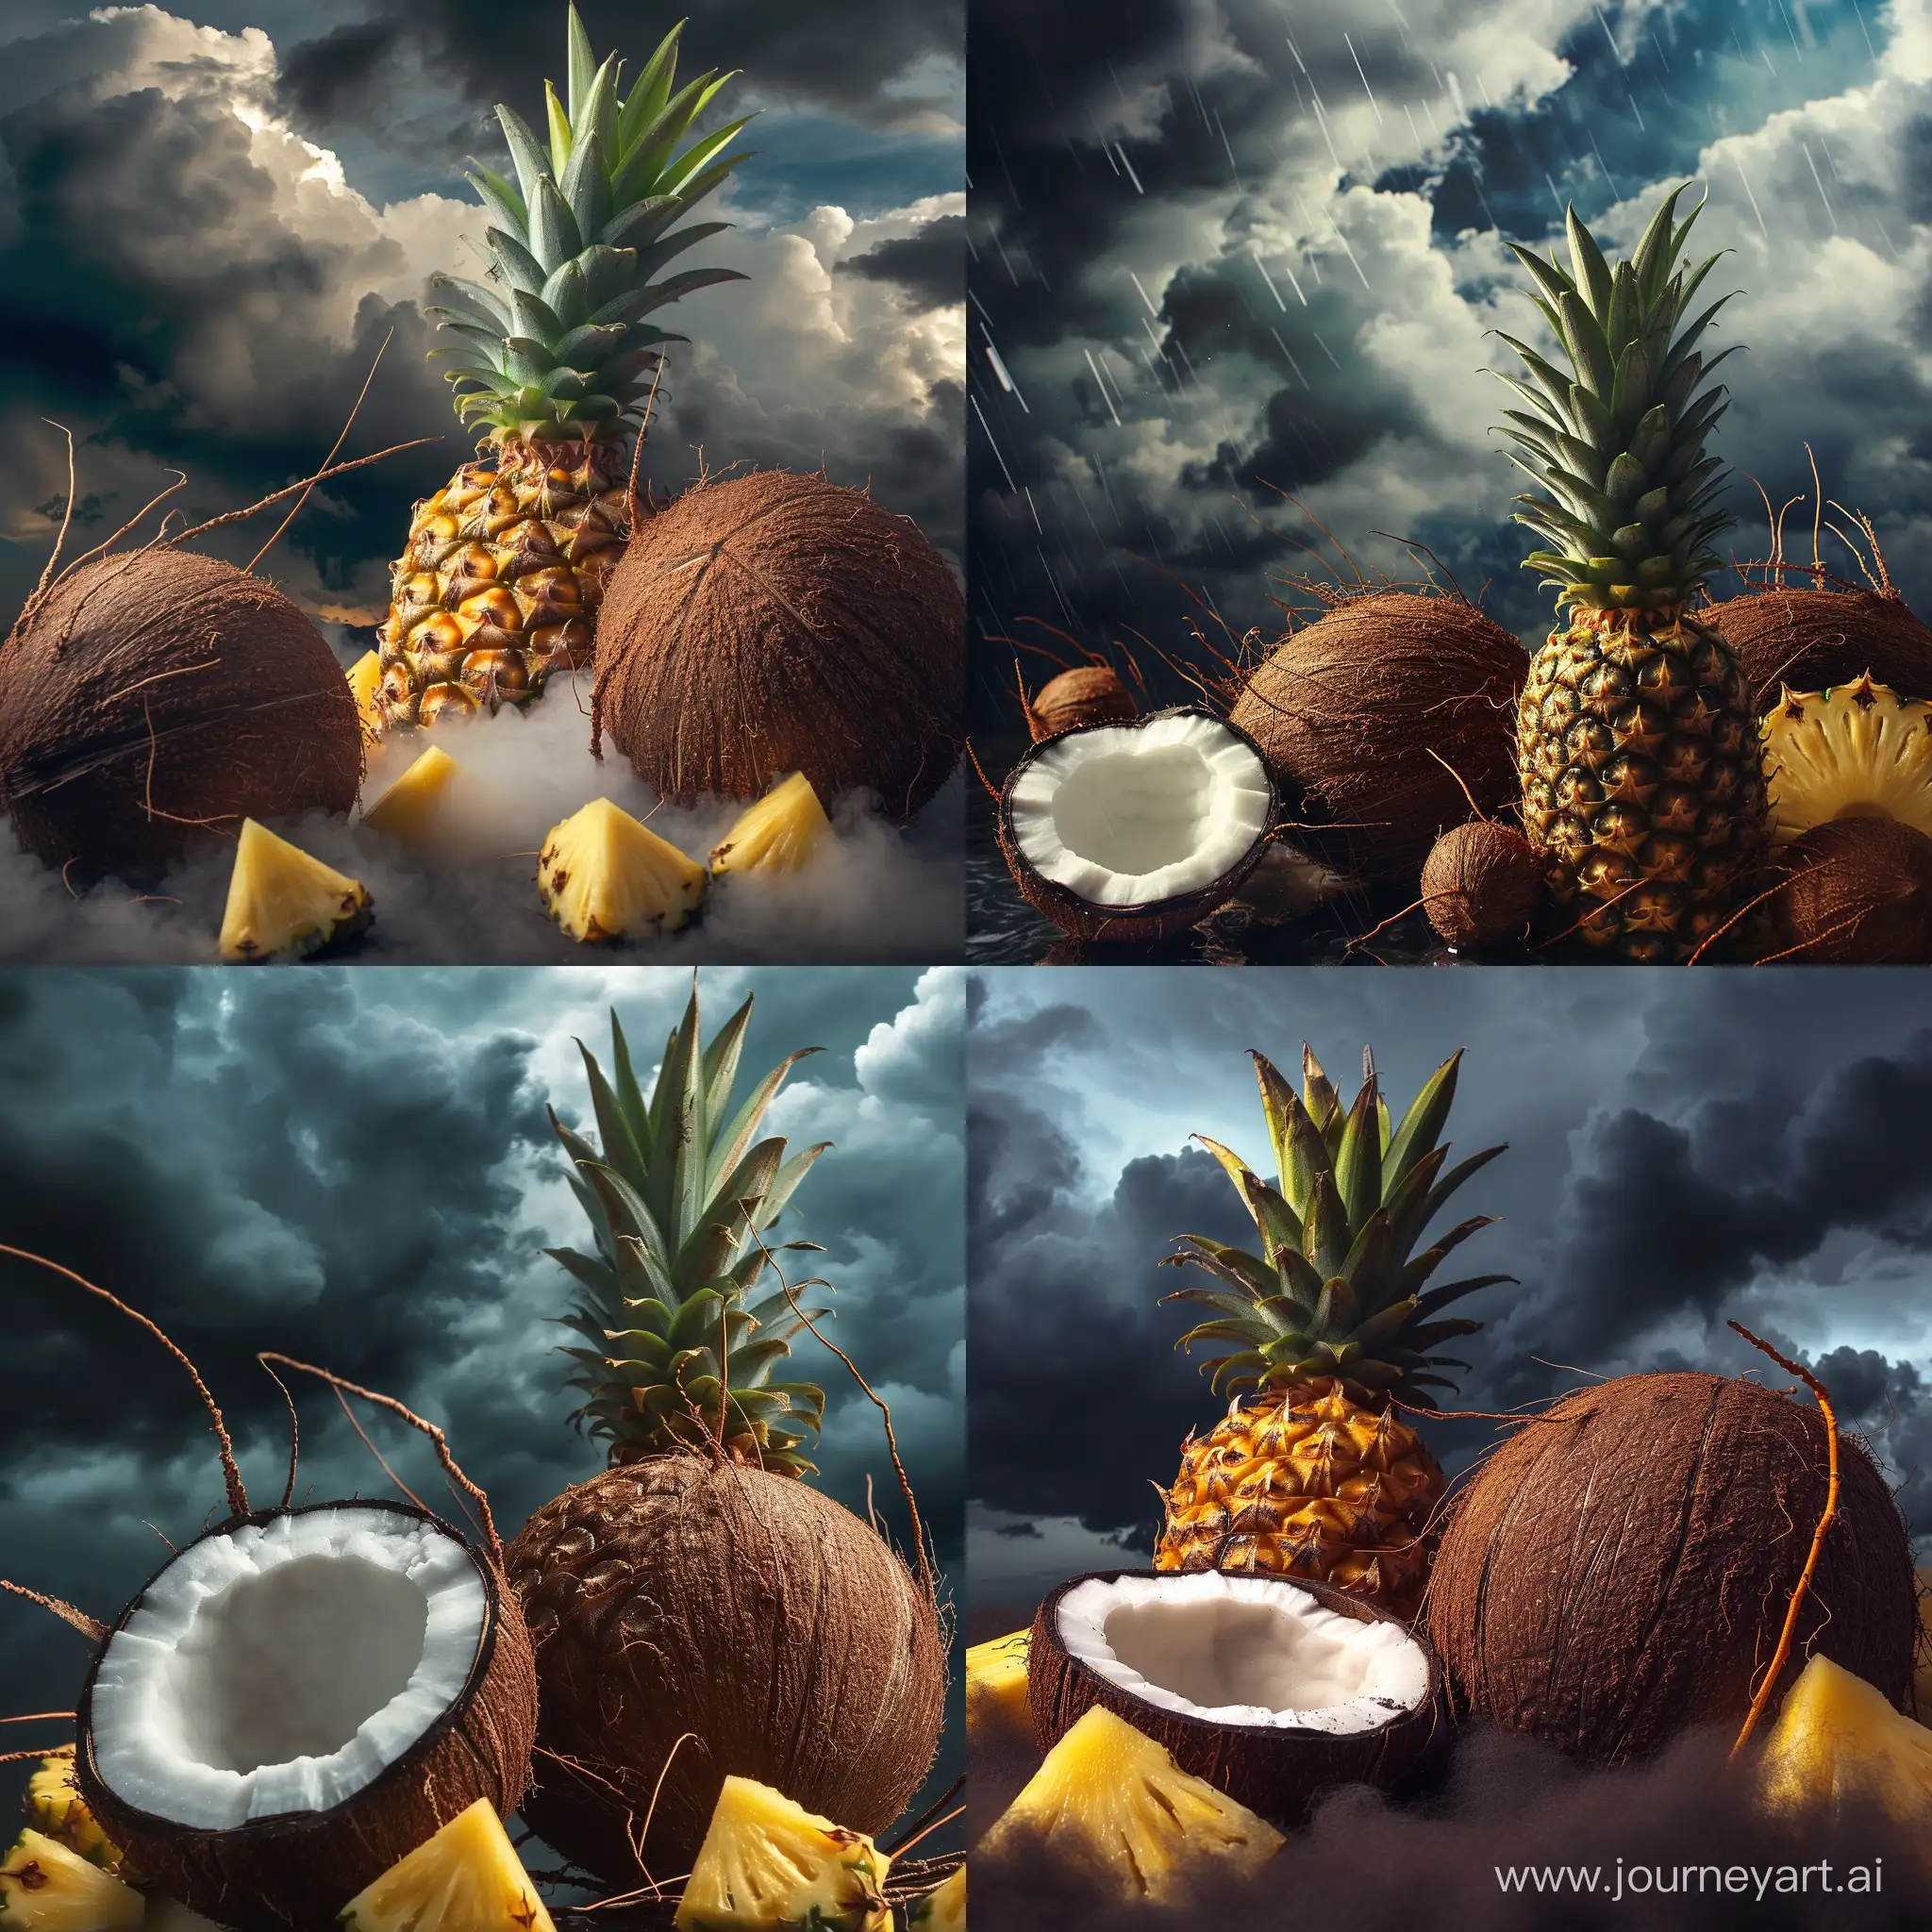 Tropical-Fruits-Coconut-and-Pineapple-Against-Dramatic-Stormy-Sky